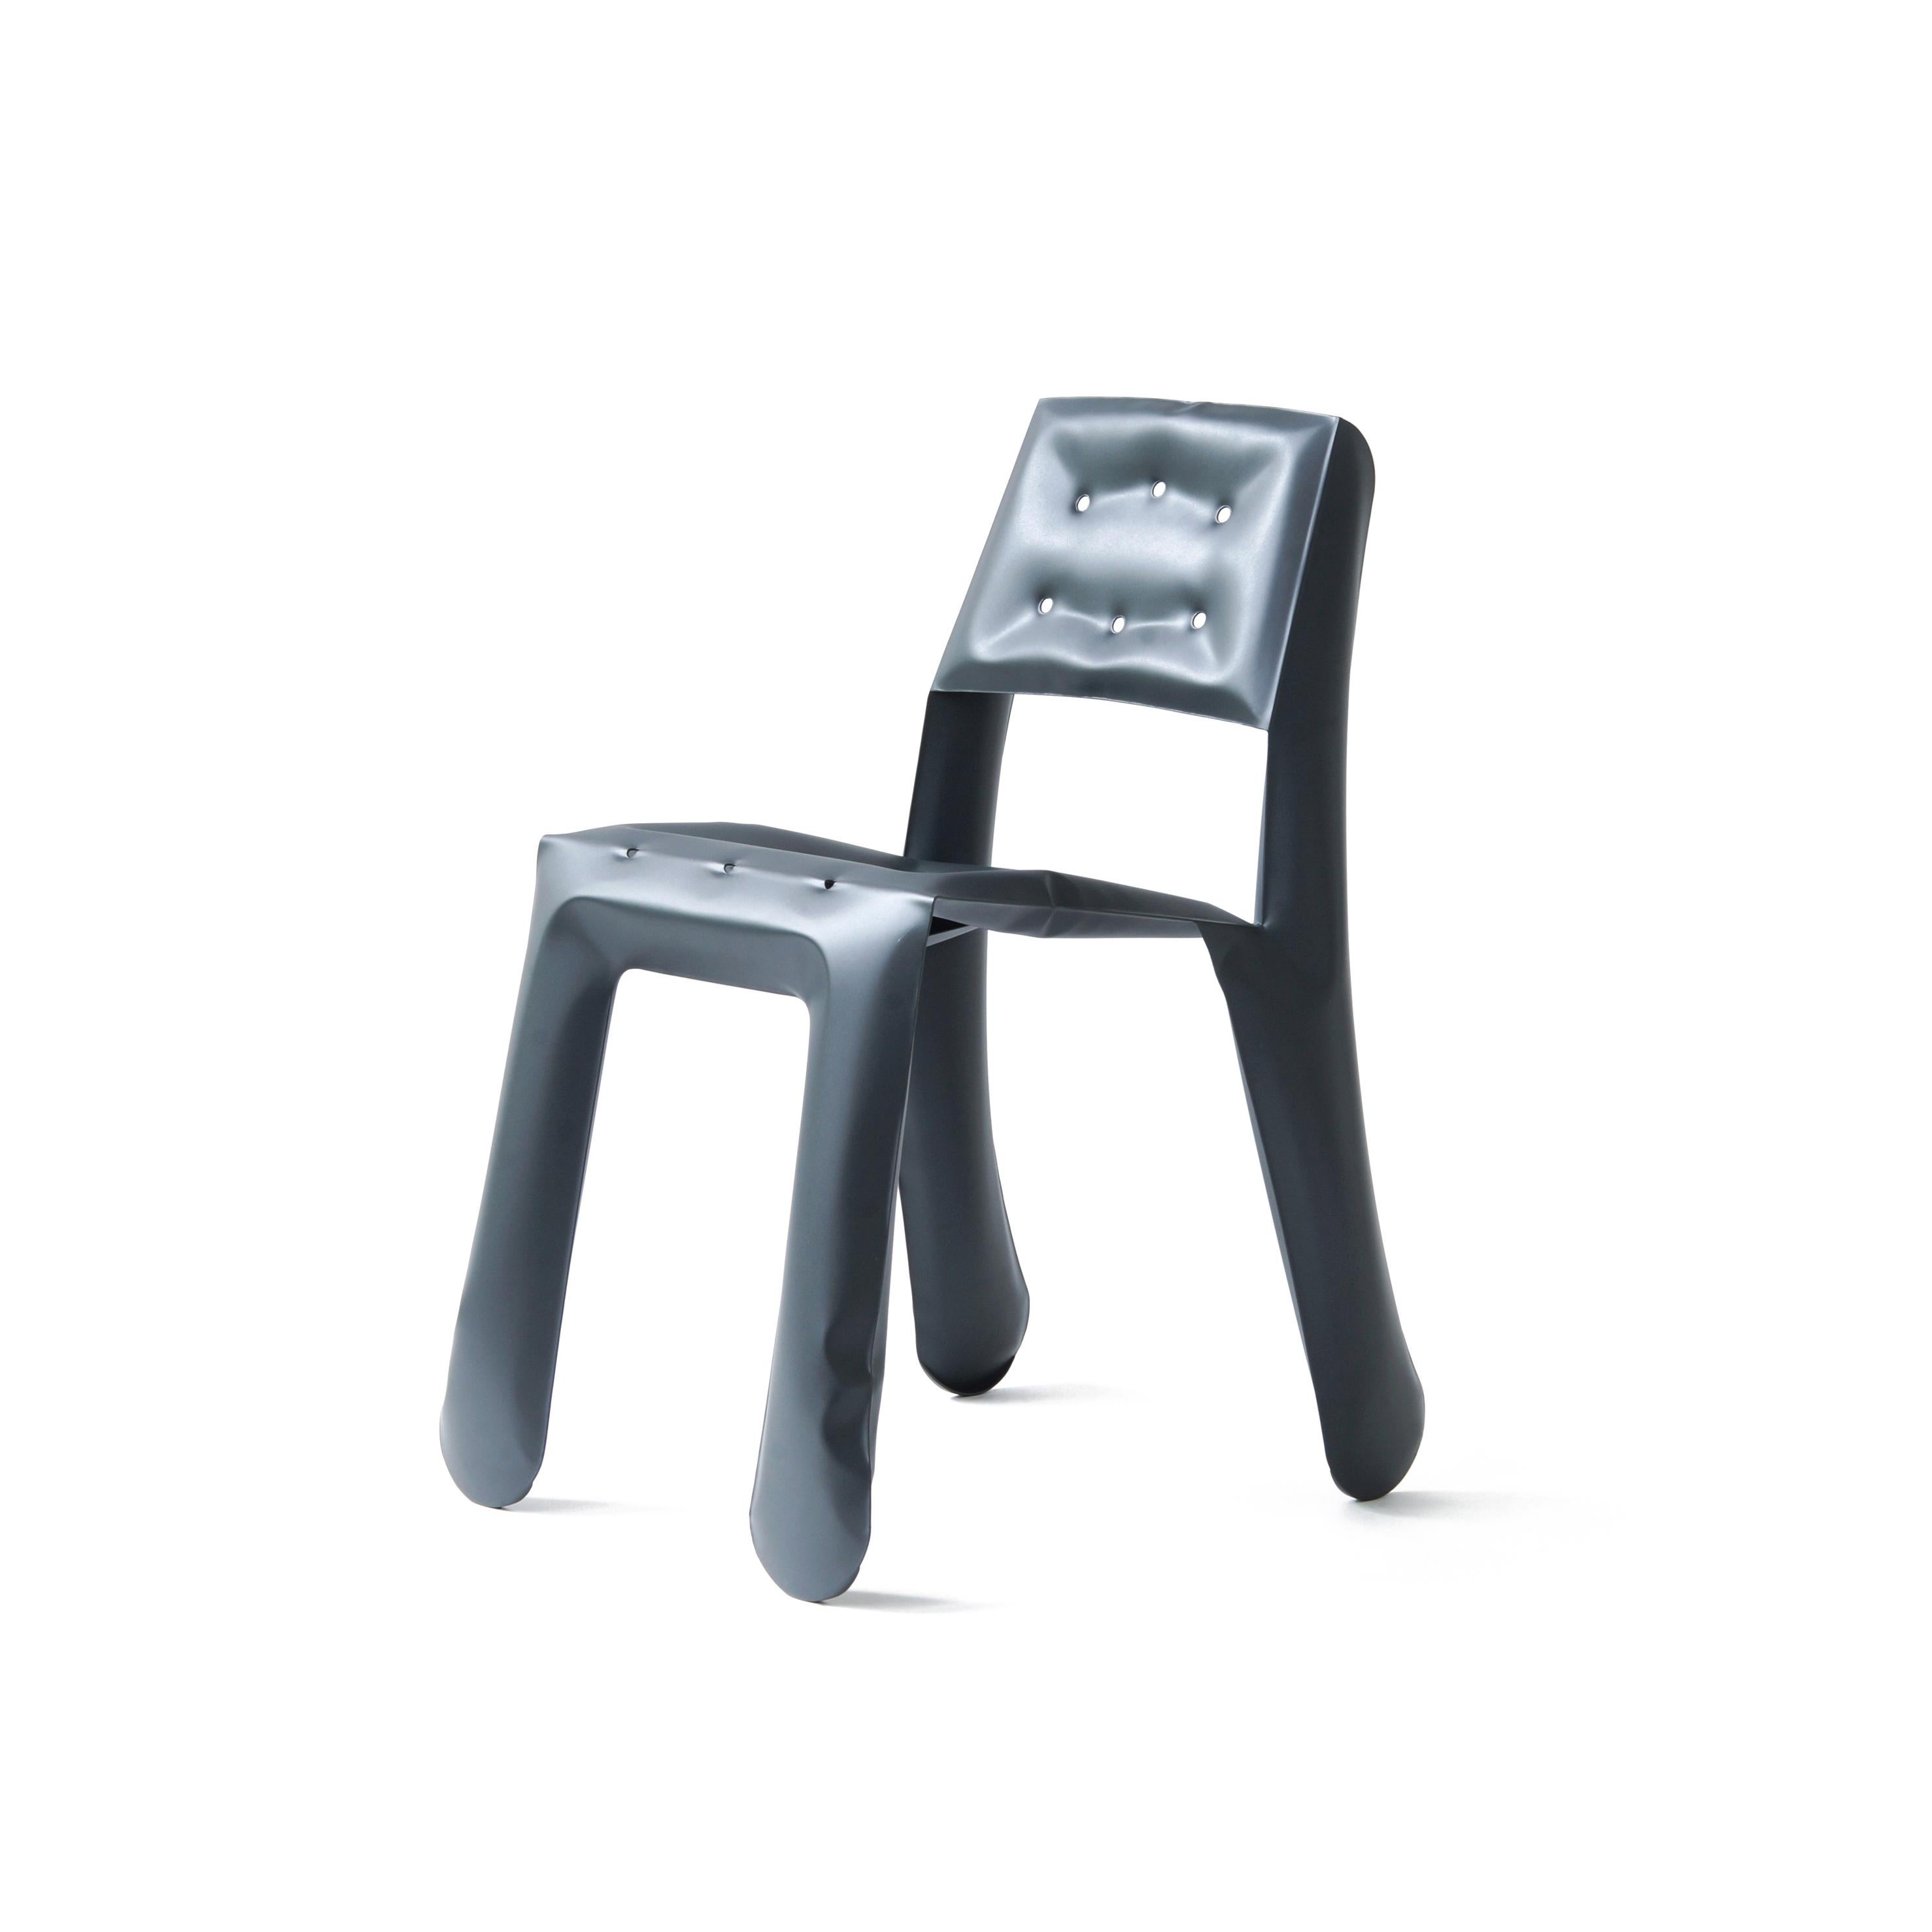 Graphite Carbon Steel Chippensteel 0.5 Sculptural Chair by Zieta
Dimensions: D 58 x W 46 x H 80 cm 
Material: Carbon steel.
Finish: Powder-coated. Matt finish.
Also available in colors: white matt, beige, black, blue-gray, graphite, moss-gray, and,